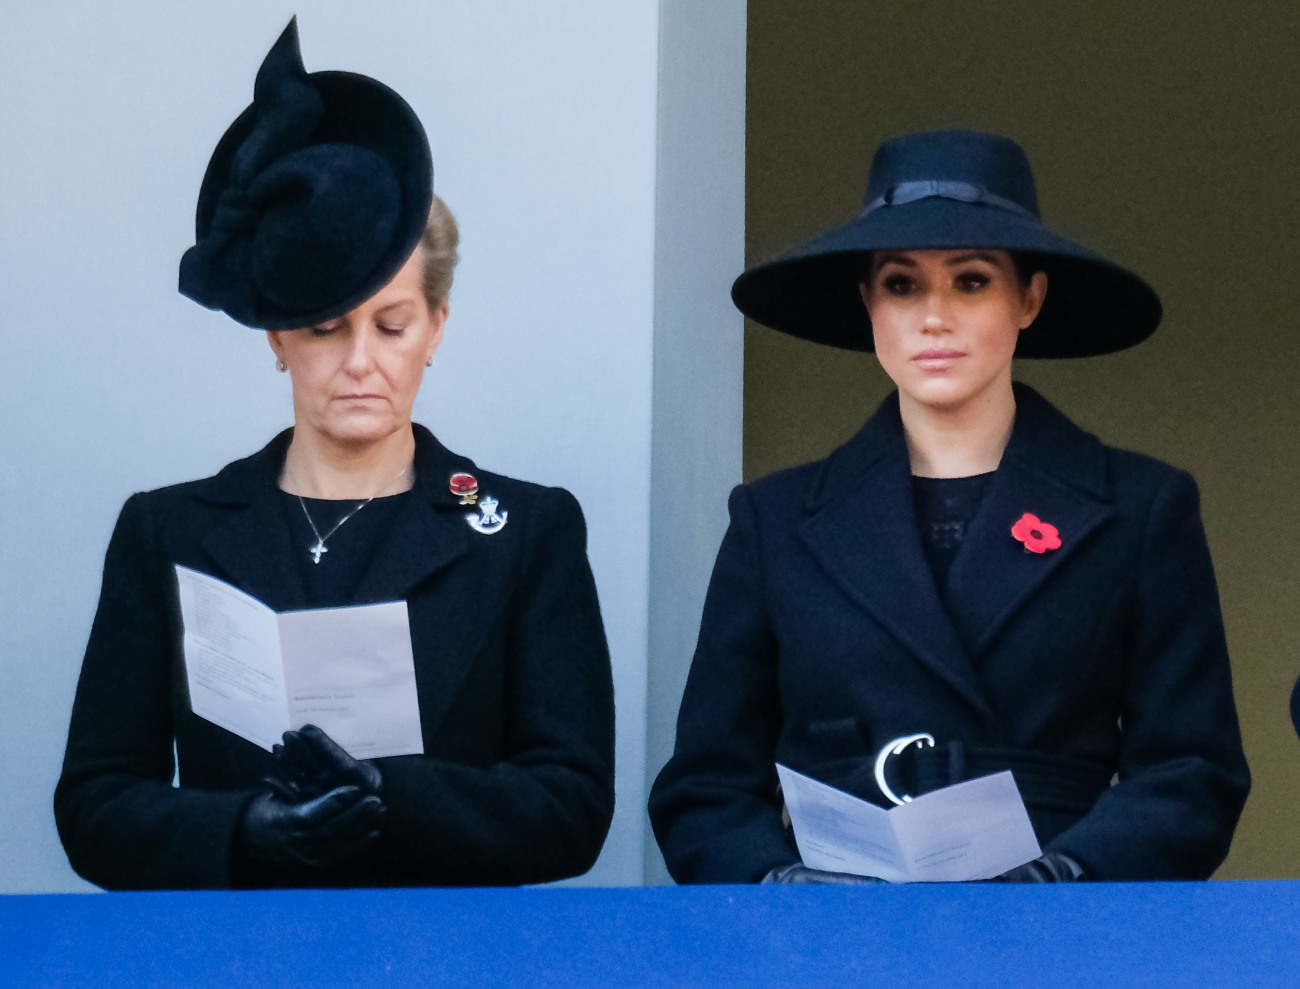 Meghan, Duchess of Sussex and HRH The Countess of Wessex attends the National Service of Remembrance at the Cenotaph on Sunday 10 November 2019